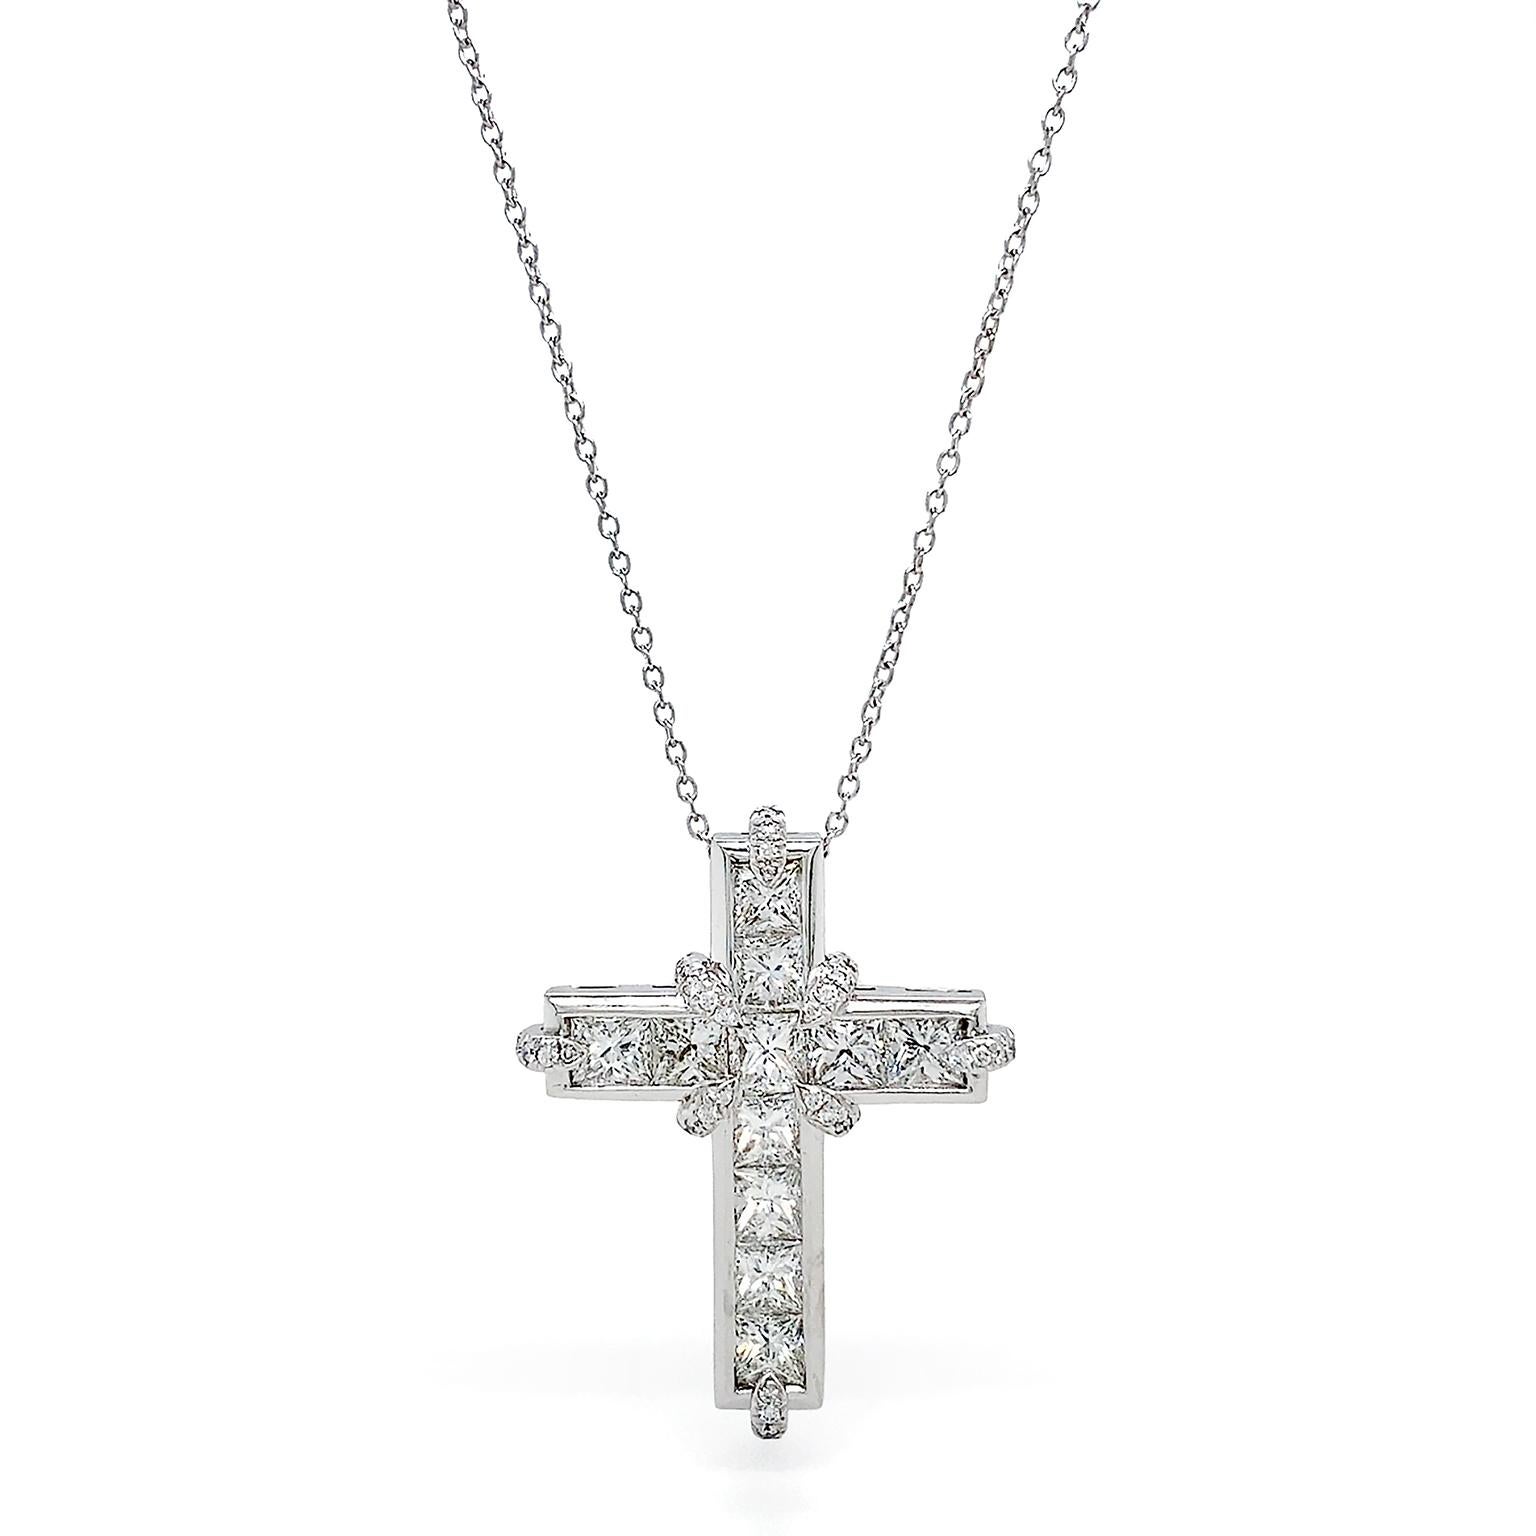 The radiant fire of princess cut diamonds create a cross for this pendant. The square shaped diamonds are channel set in platinum, while brilliant cut diamonds accent the inner corners and outer edges for additional sparkle. The collective weight is